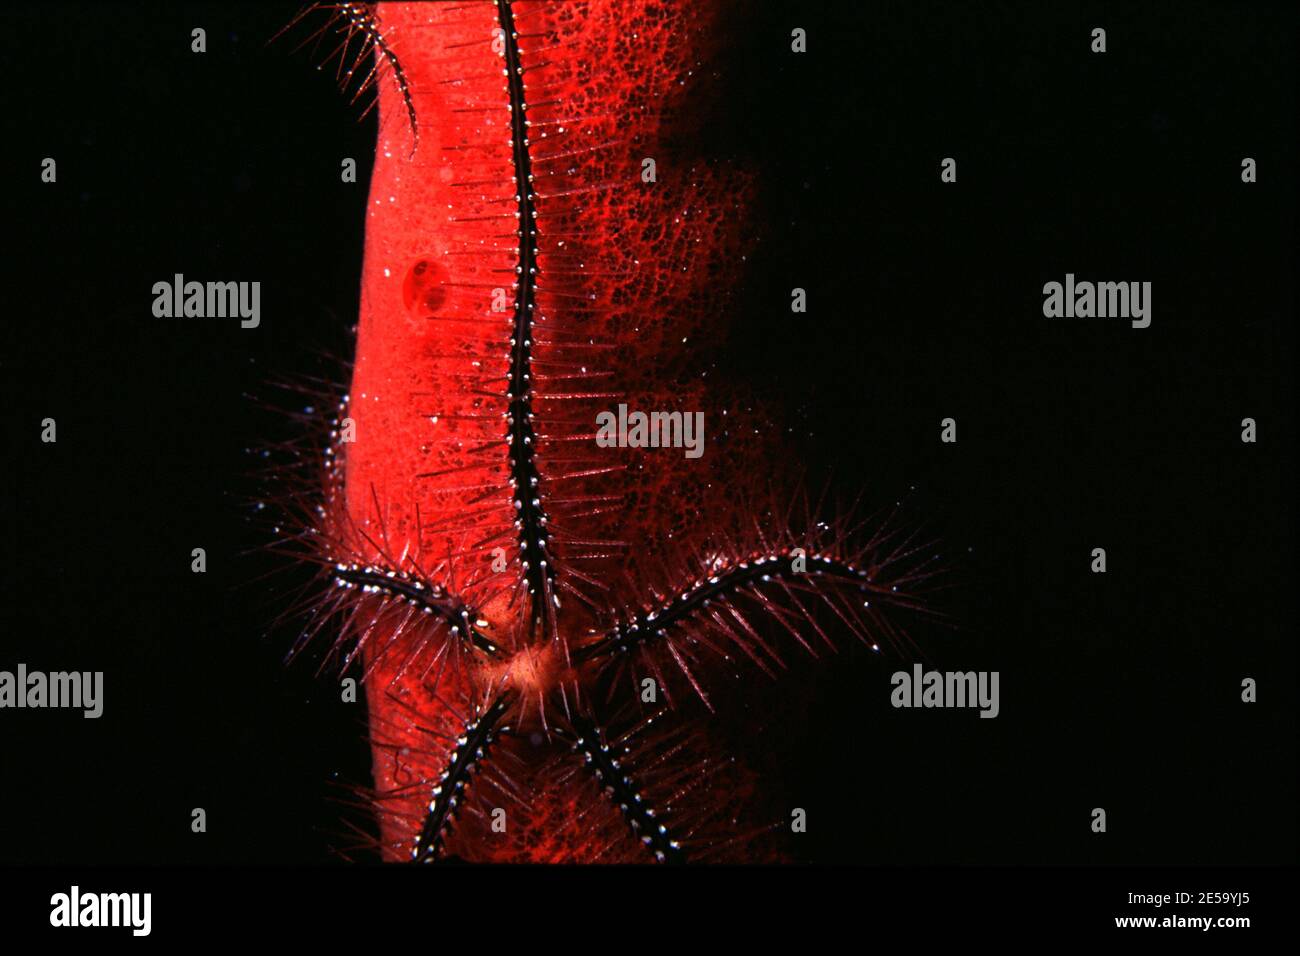 Closeup of a red-colored Brittle Star on Sponge with a dark backgroundan Stock Photo